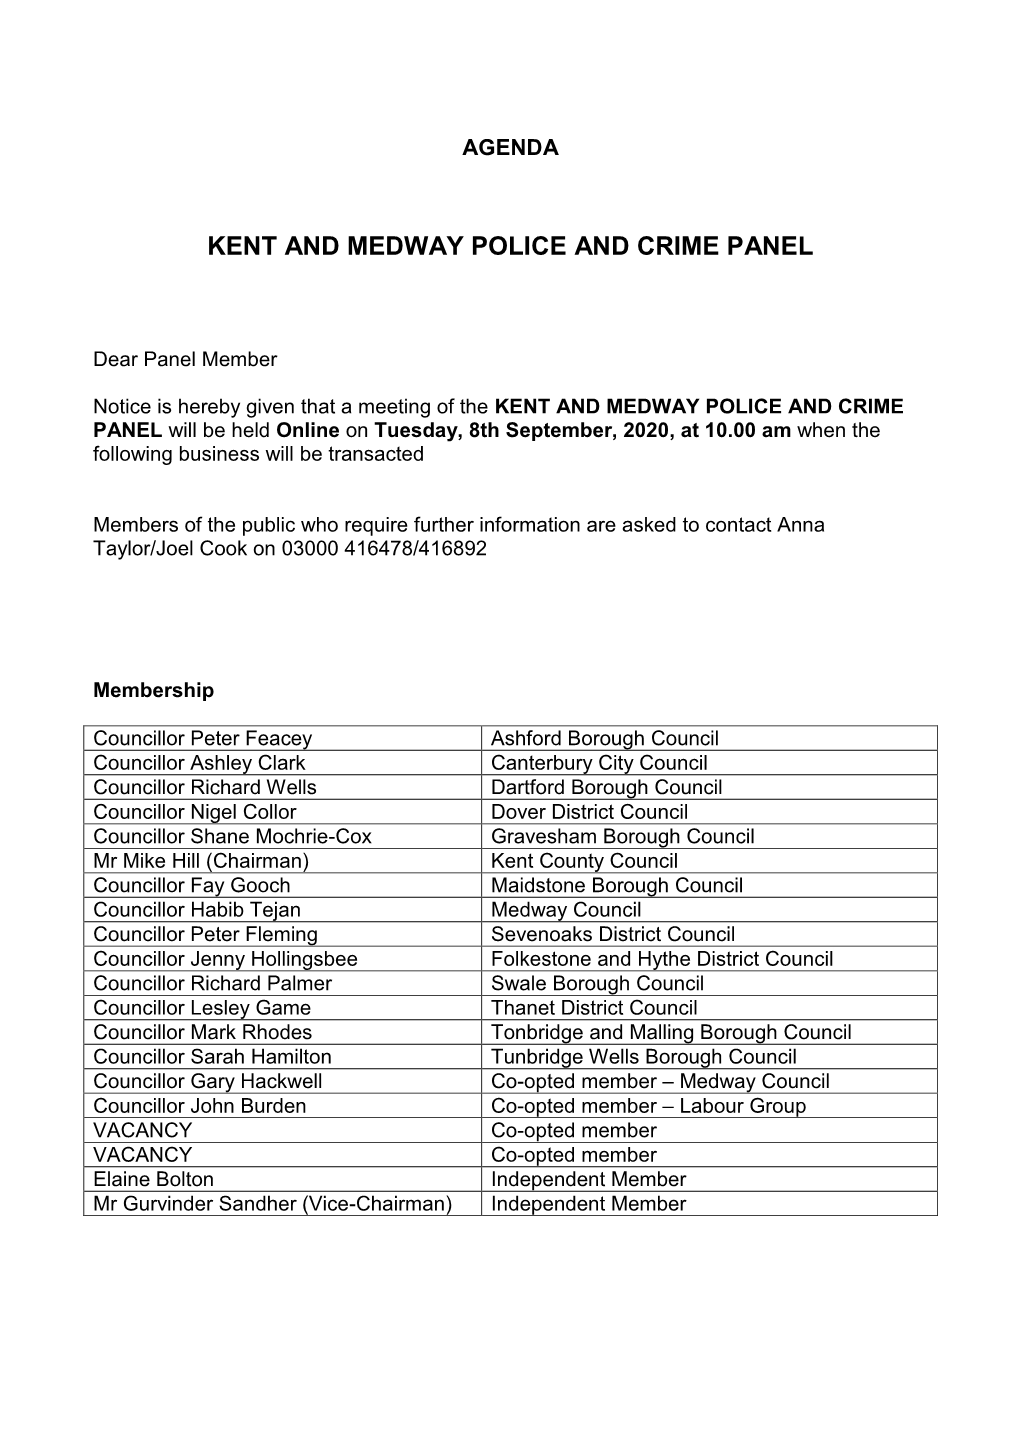 Kent and Medway Police and Crime Panel